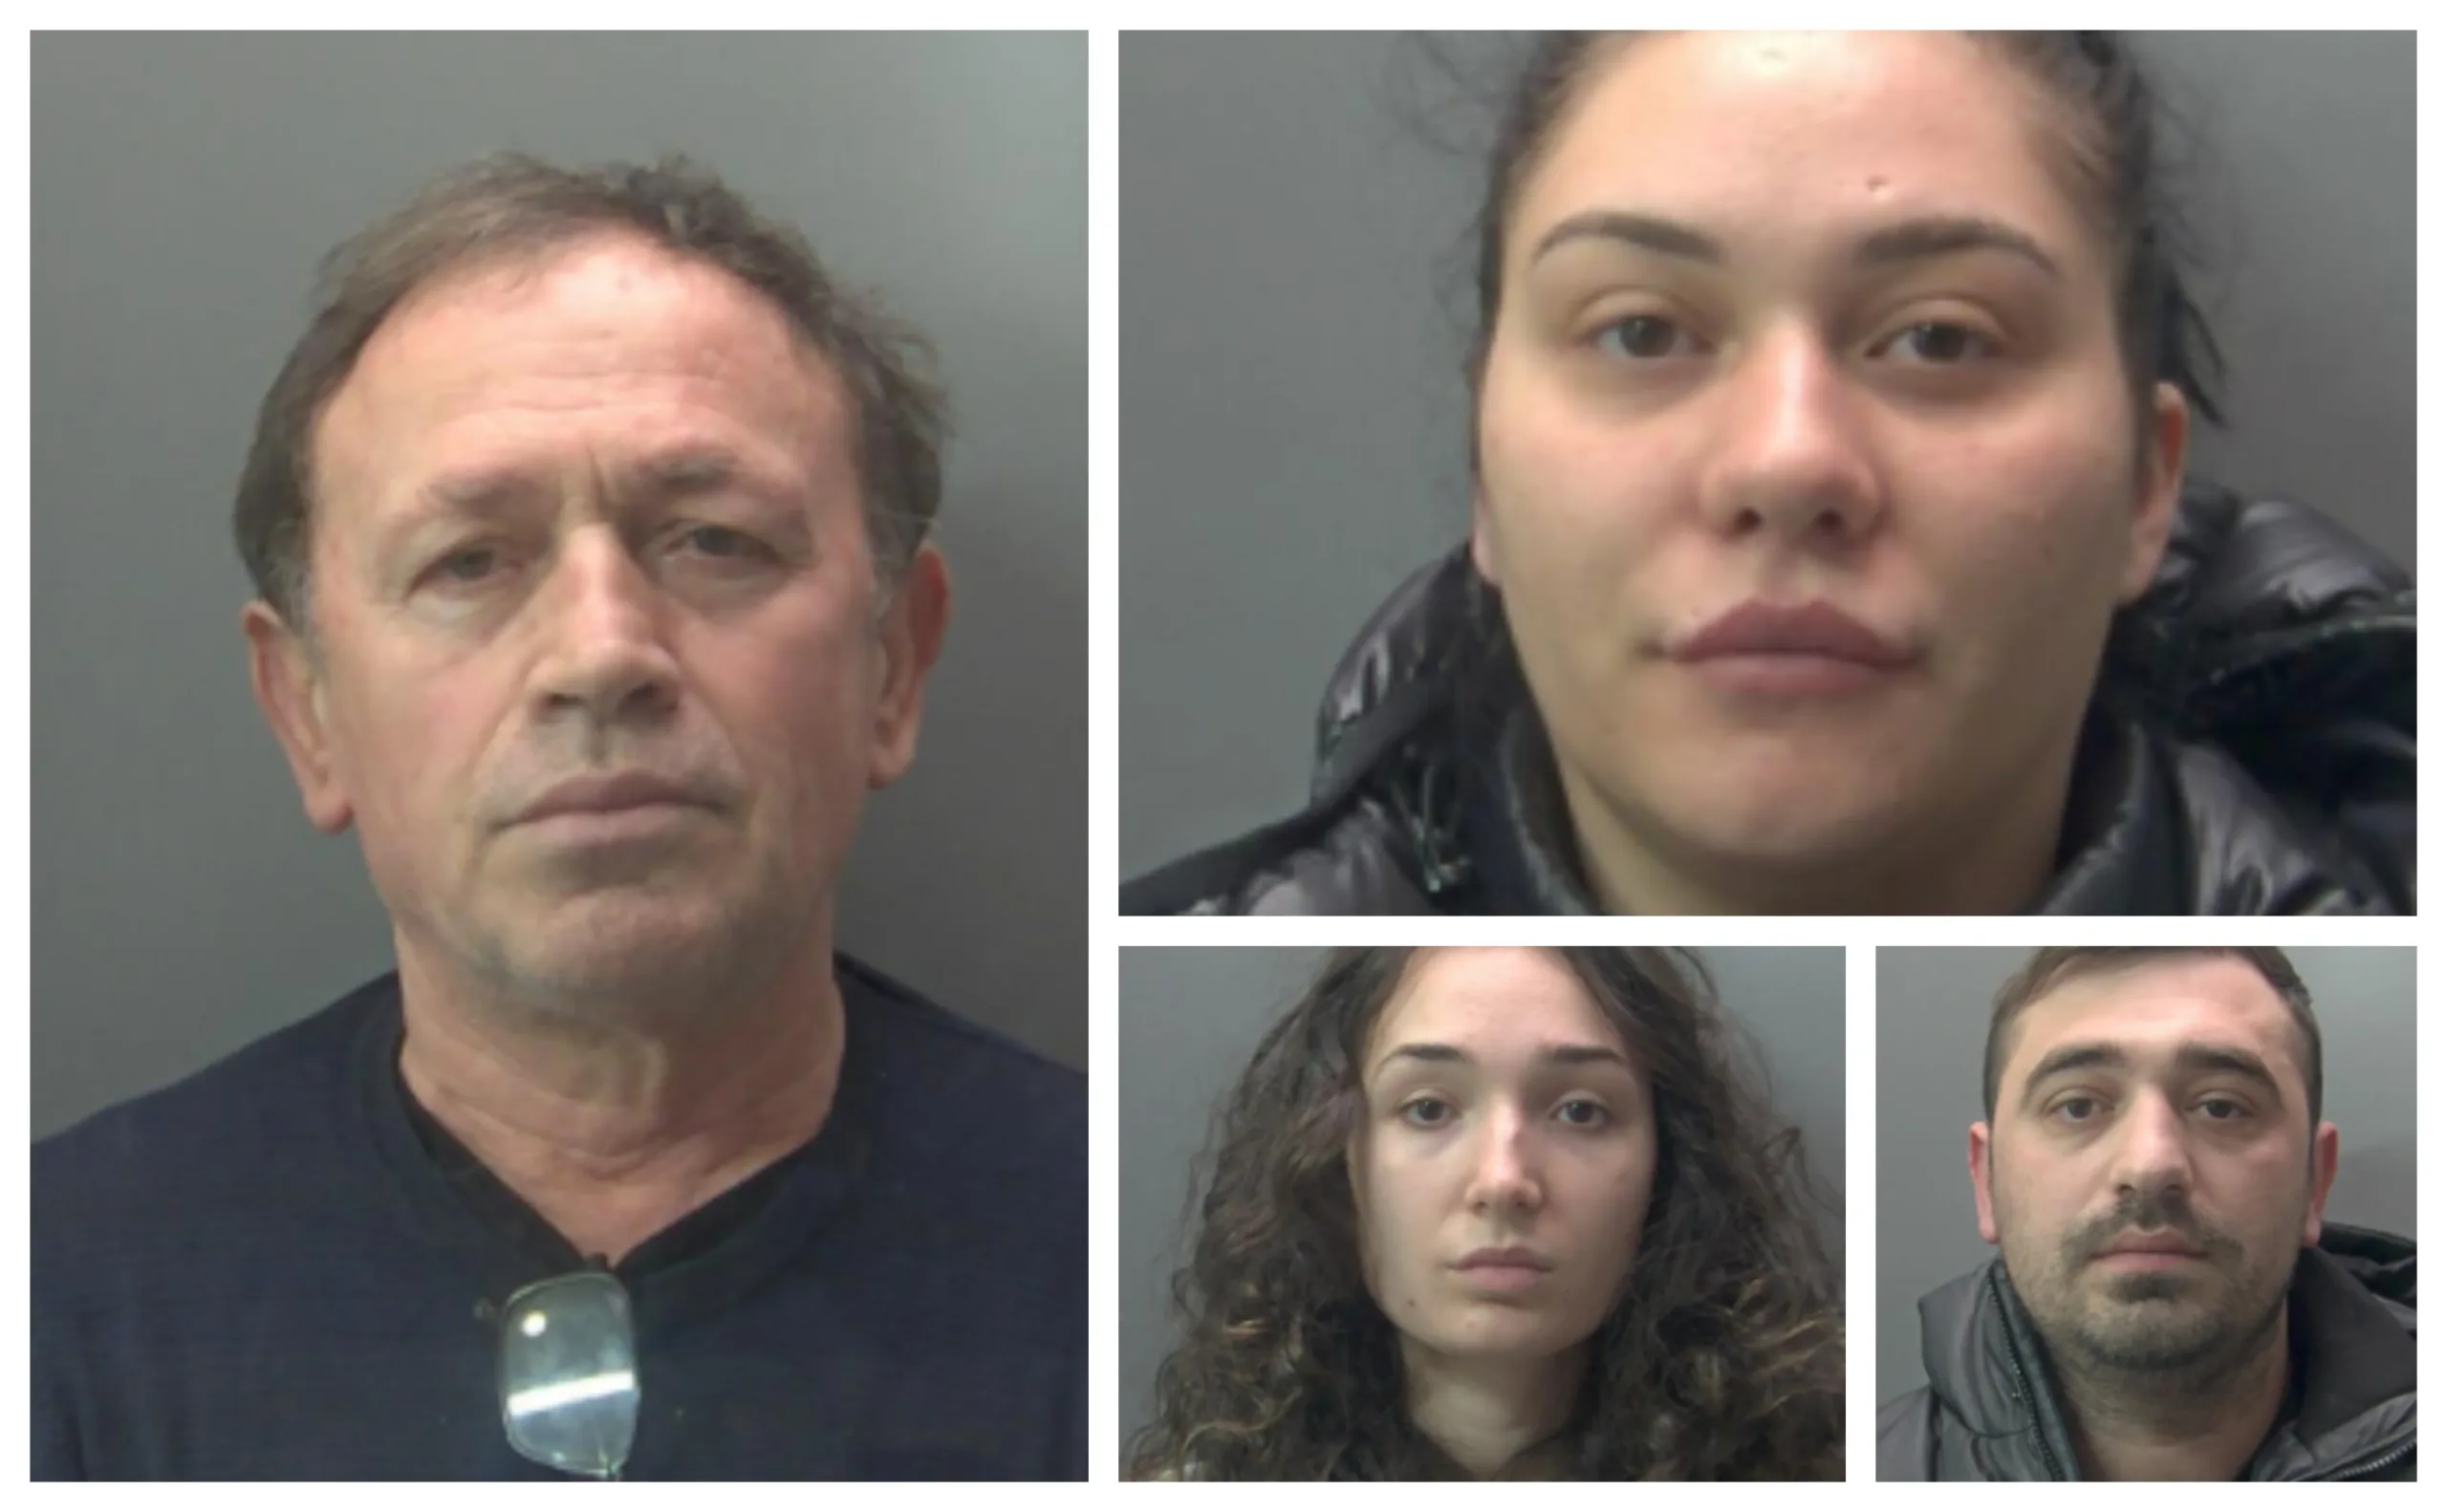 On 11 April last year, all four appeared at Peterborough Crown Court where they were sentenced as follows: Xhejni Mucaj, of Hartley Avenue, Fengate – jailed for seven years and six months; Christiana Sopikou, of Hartley Avenue, Fengate – jailed for six years and five months; Bahri Mucaj, of Oatfield Street, Glasgow – jailed for seven years; Sabina Mucaj, of Freston, Paston – jailed for nine years